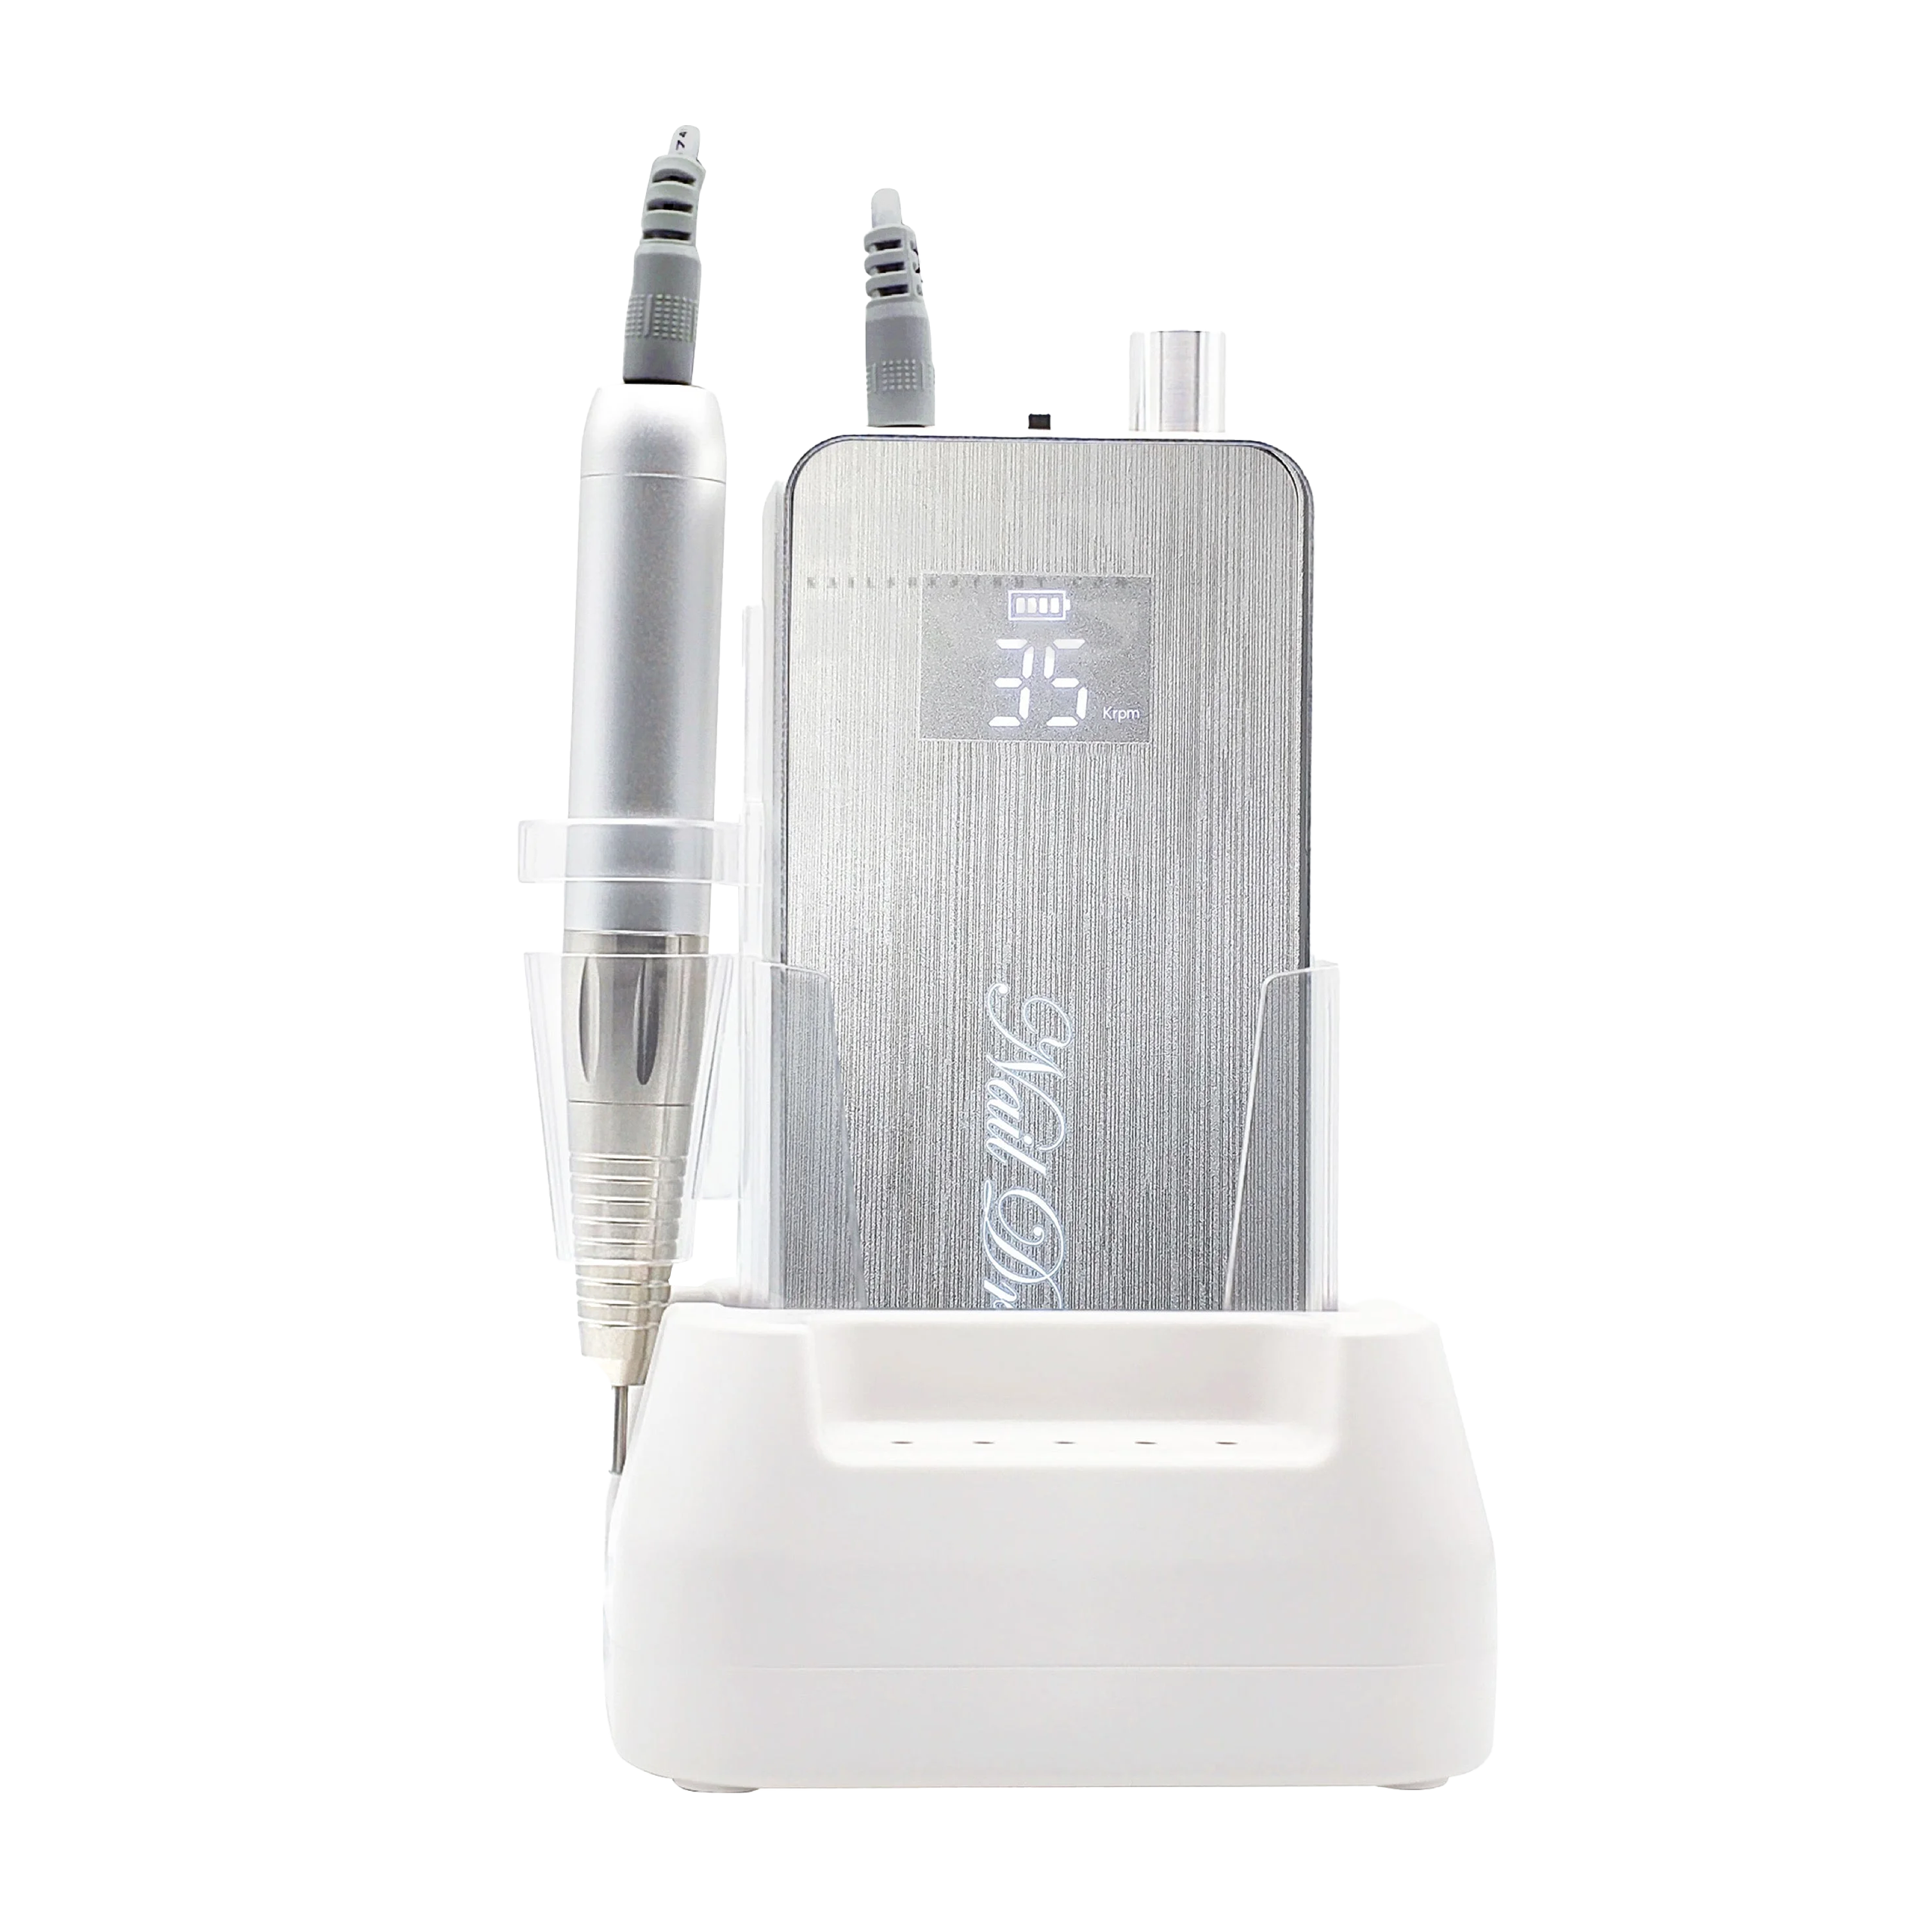 PRO Nail Drill - Rechargeable E-File (White) - 1 Year Warranty - Ibett Nails